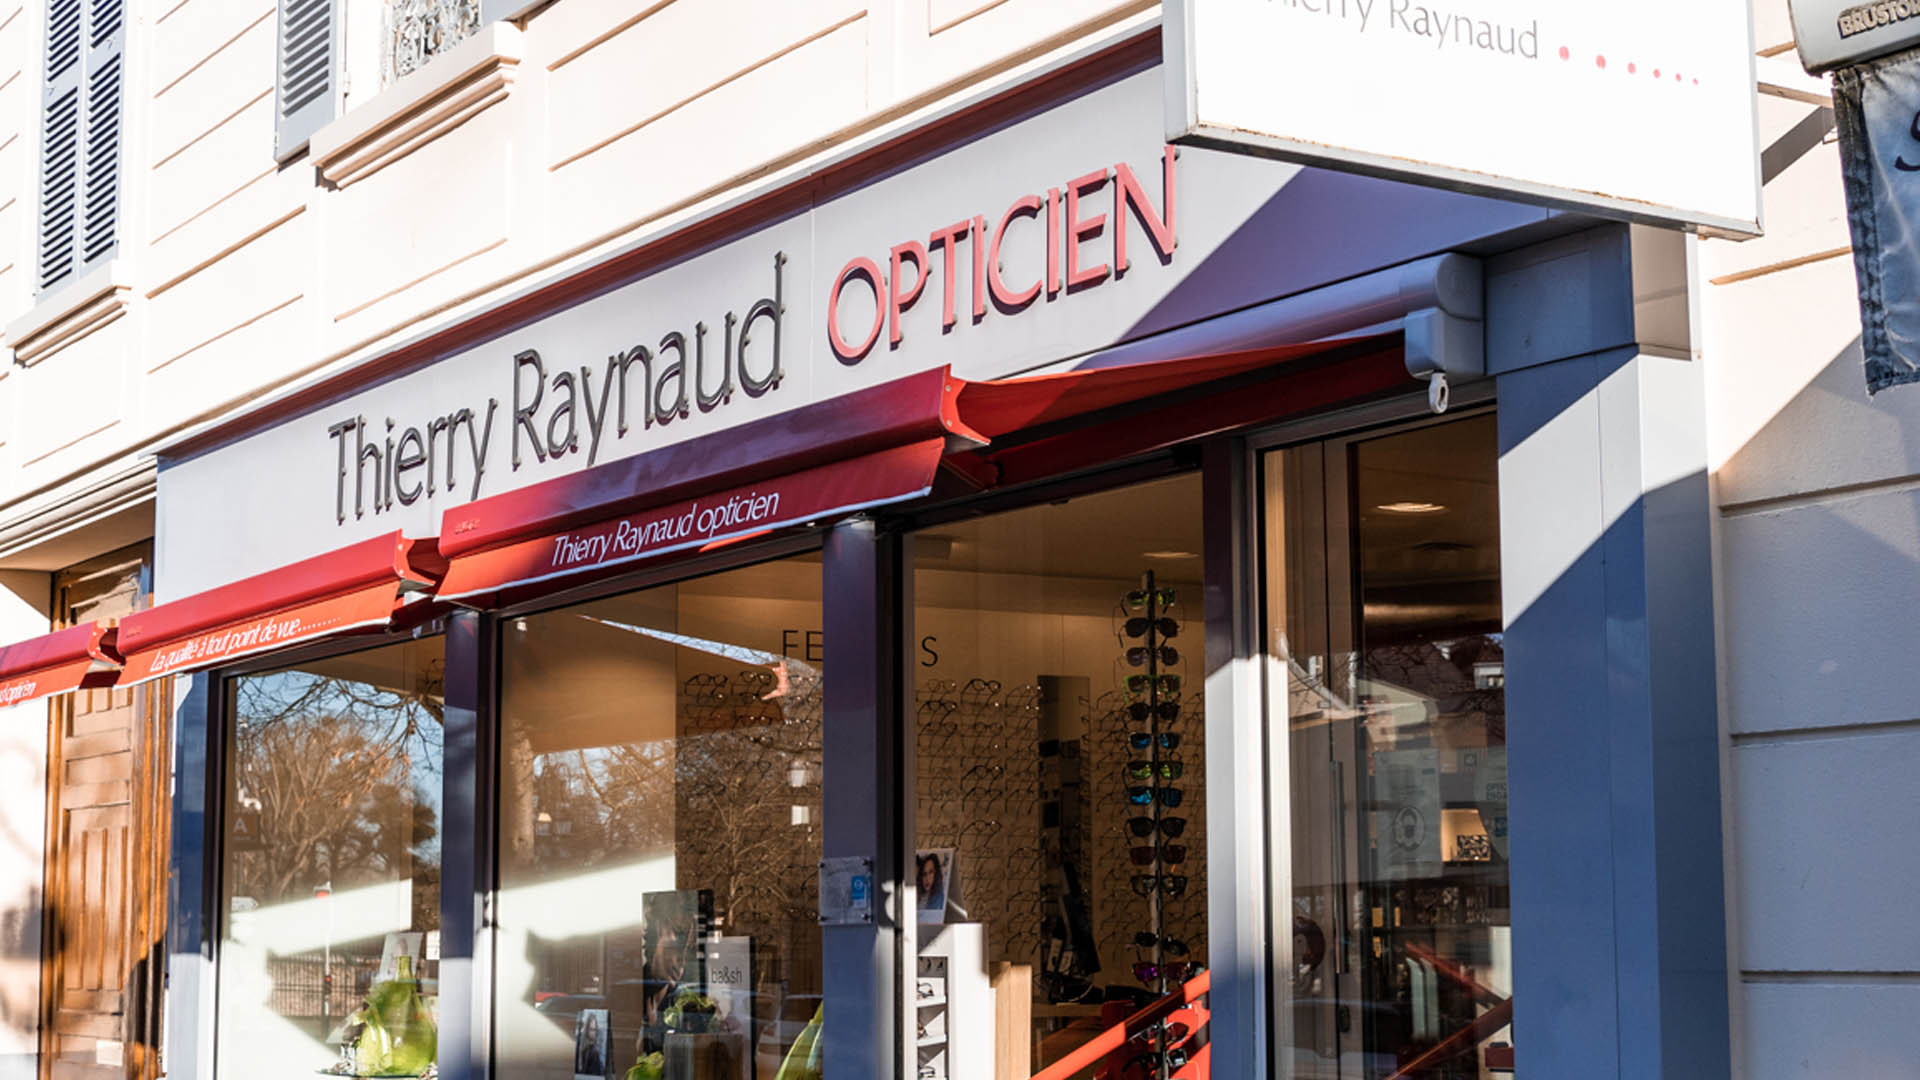 boutique thierry raynaud opticien